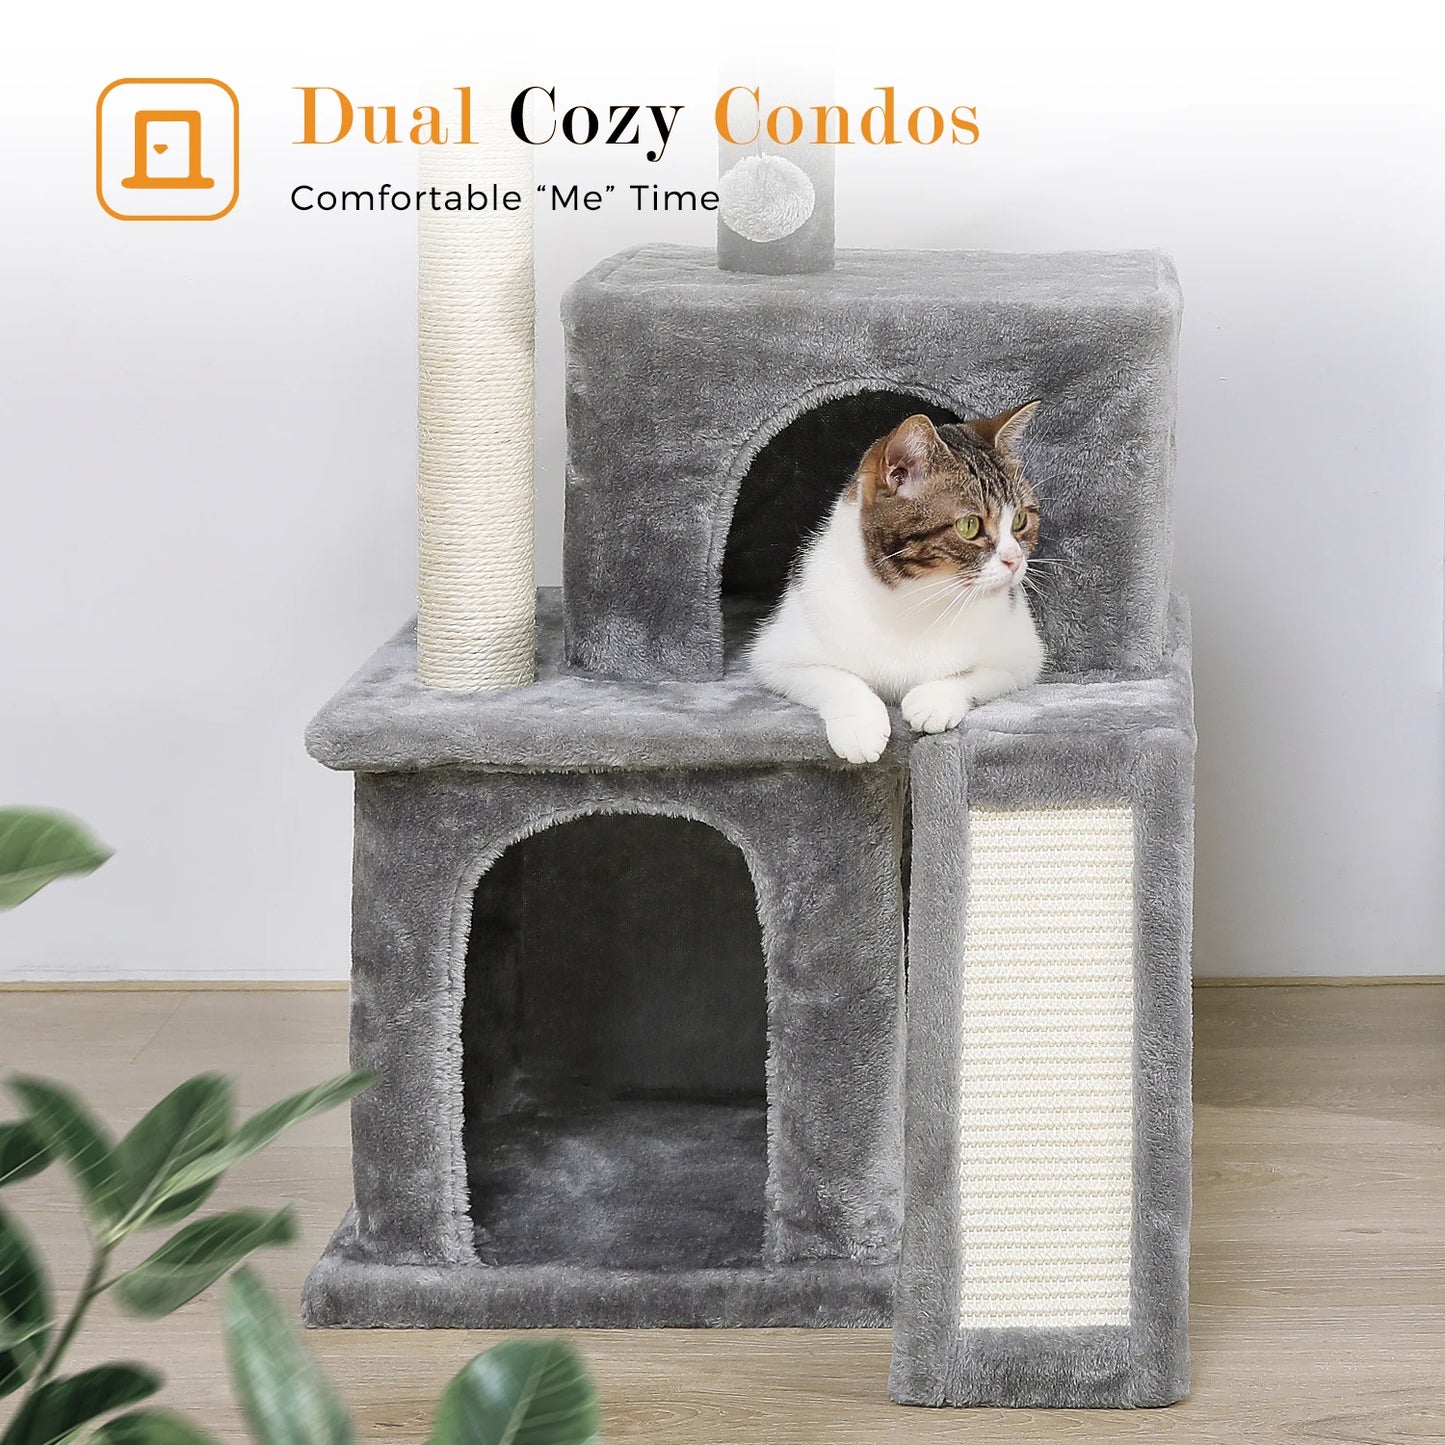 Luxury Cat Tree Towers: Double Condos, Spacious Perch, Hammock, Scratching Sisal Post, and Dangling Balls - Ultimate Feline Playground